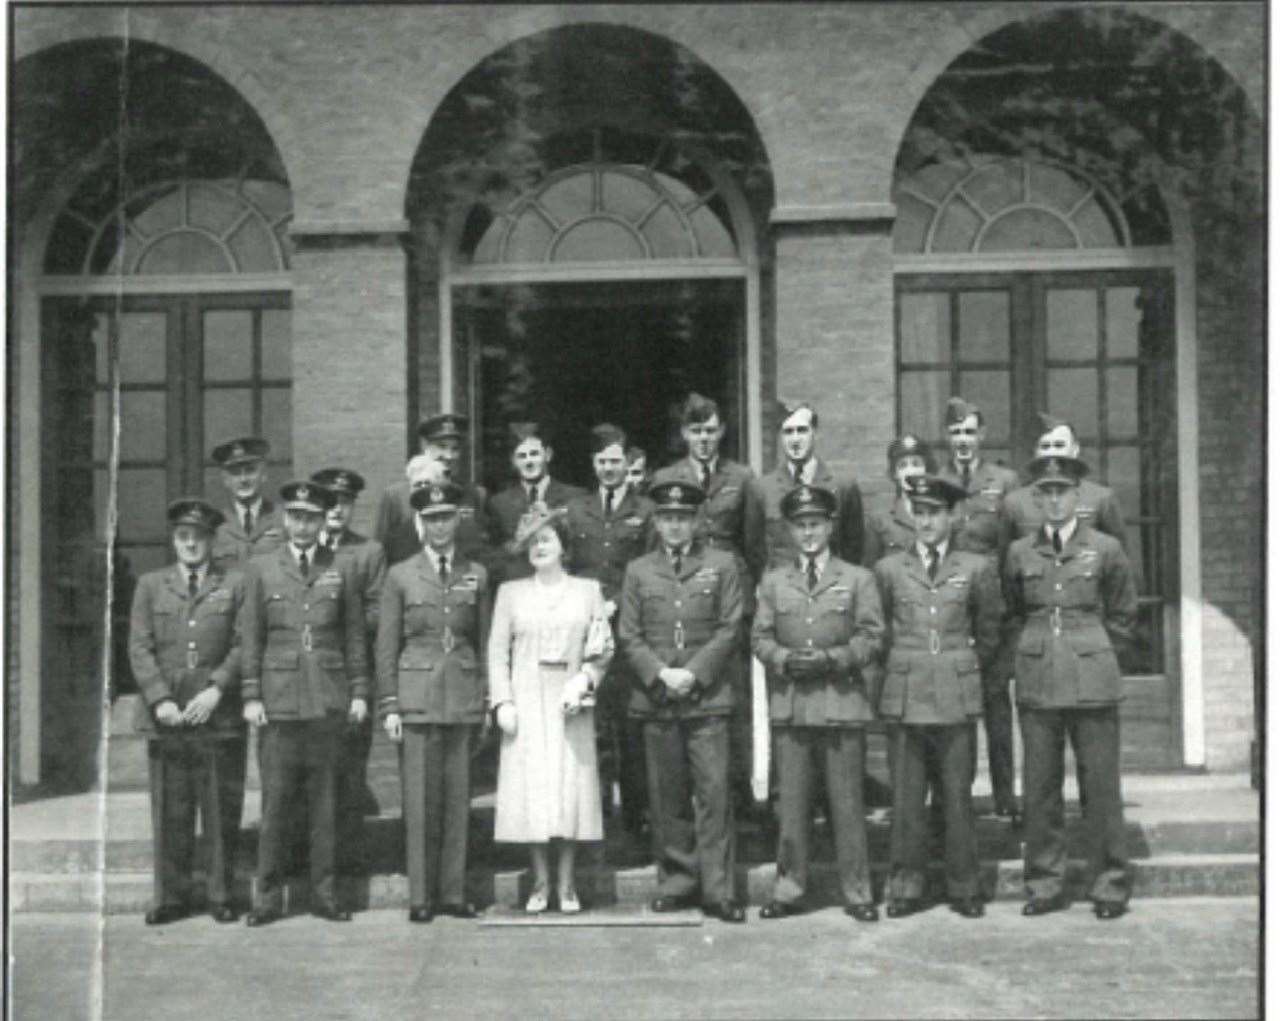 King George VI and Queen Elizabeth, The Queen Mother, outside the Officers’ Mess at RAF Scampton (West Lindsey District Council/PA)